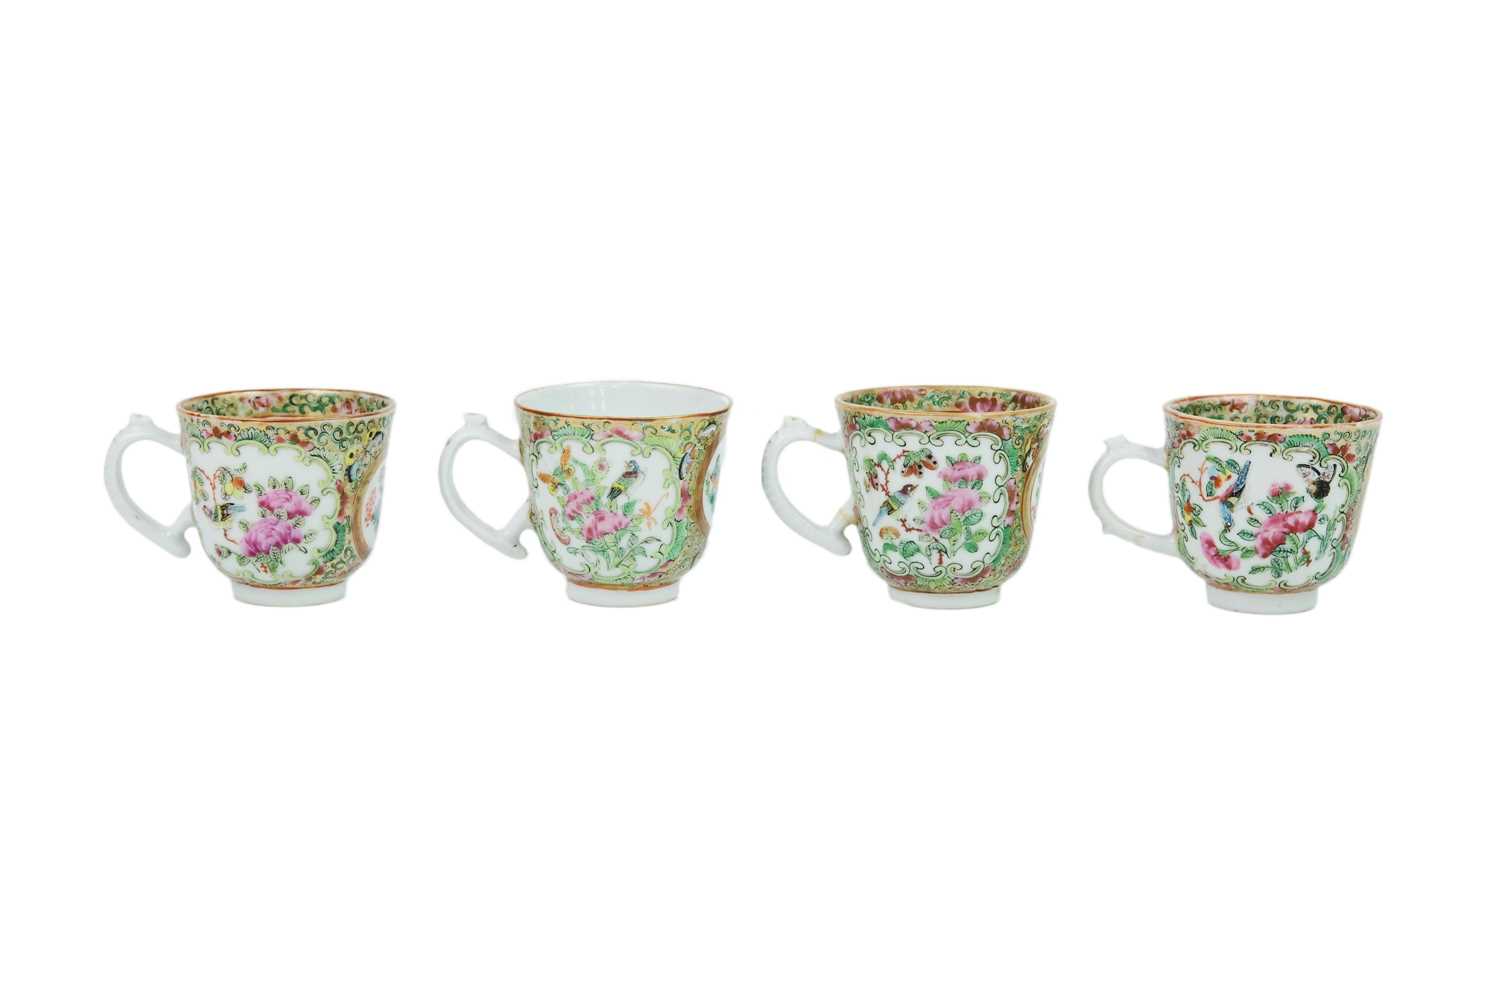 Seven Chinese famille rose porcelain cups and two saucer dishes, 18th century. - Image 3 of 5